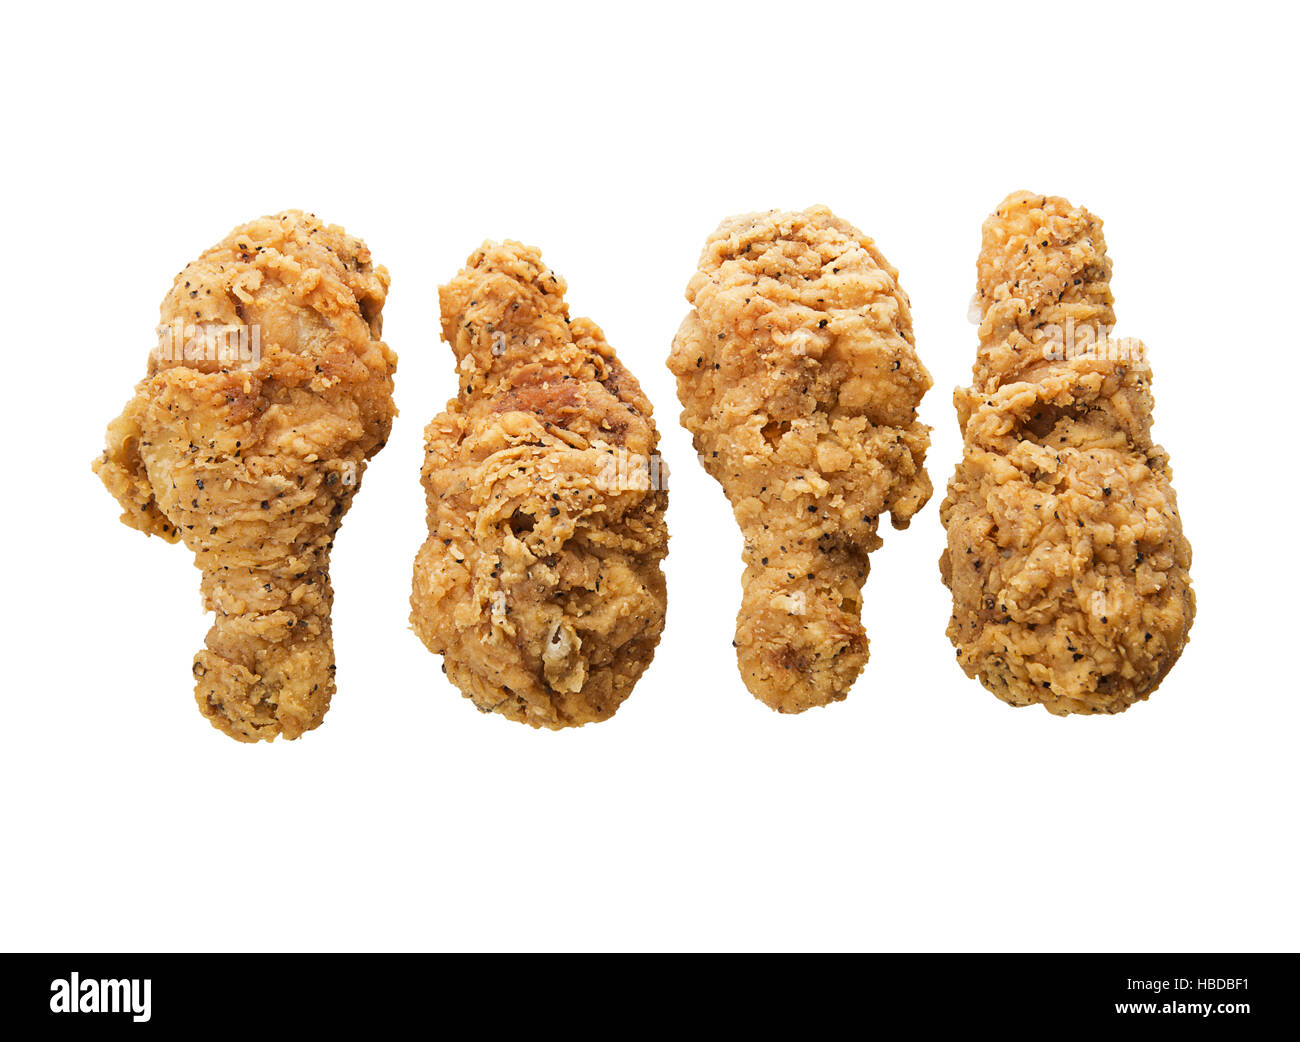 fried chicken wings Stock Photo